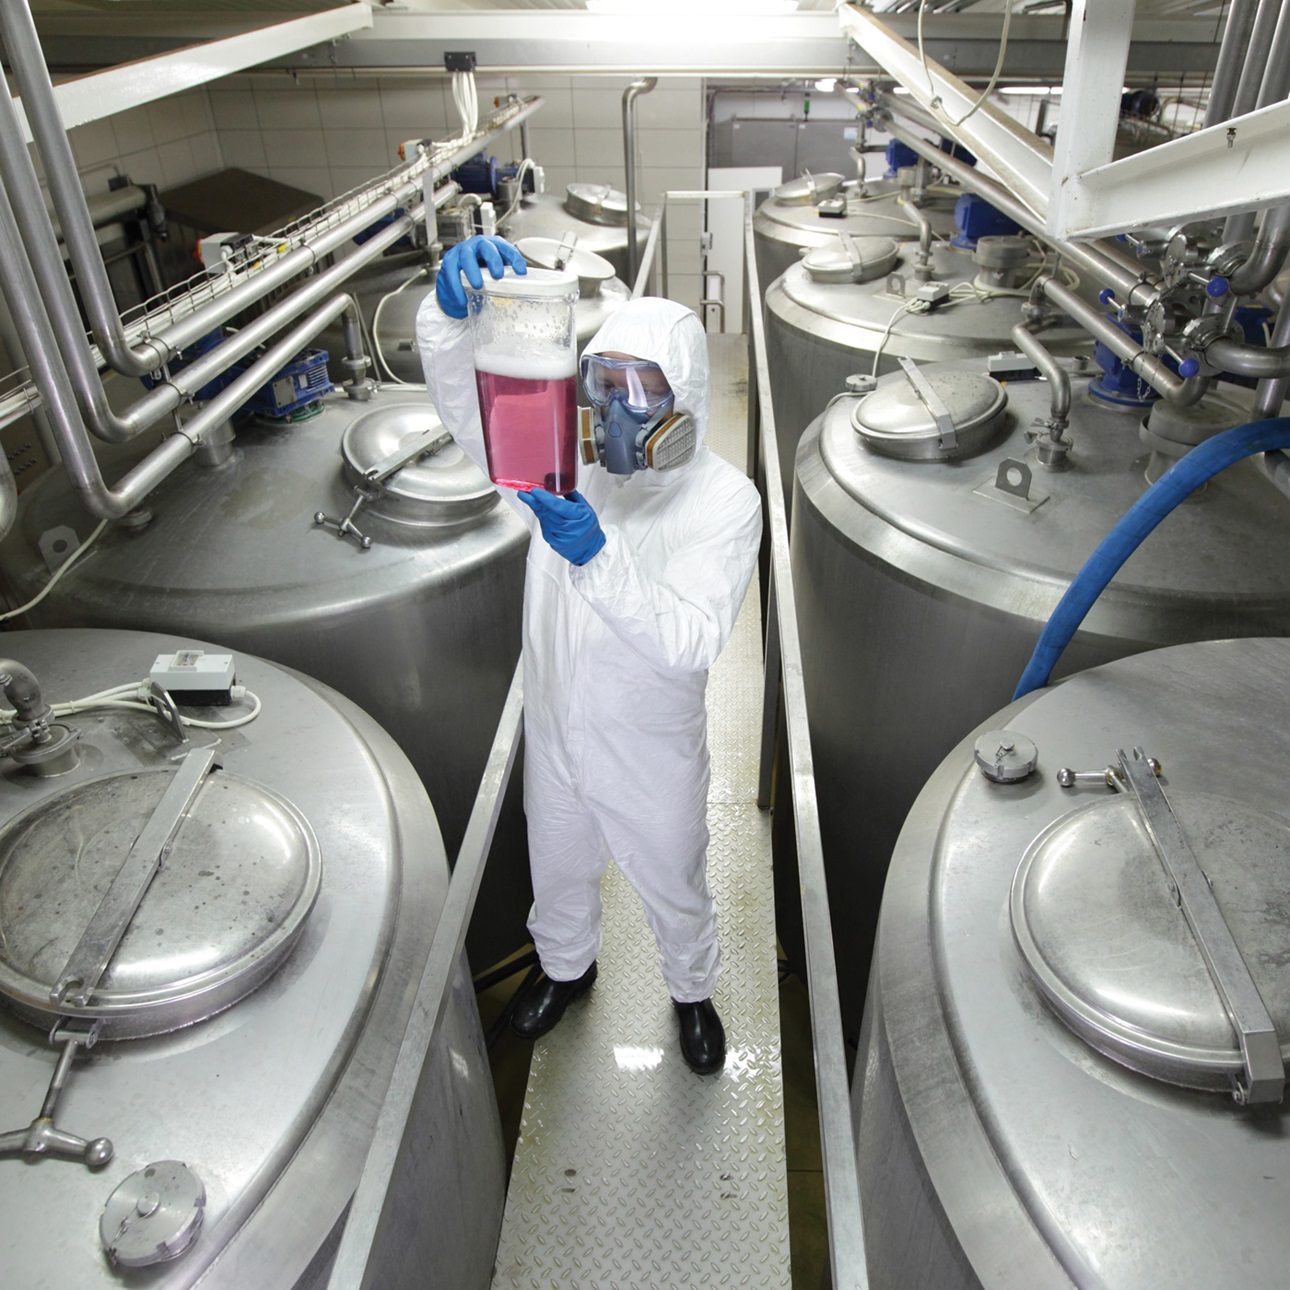 Specialist in protective uniform, mask, goggles, gloves and wellies controlling industrial process,examining sample.